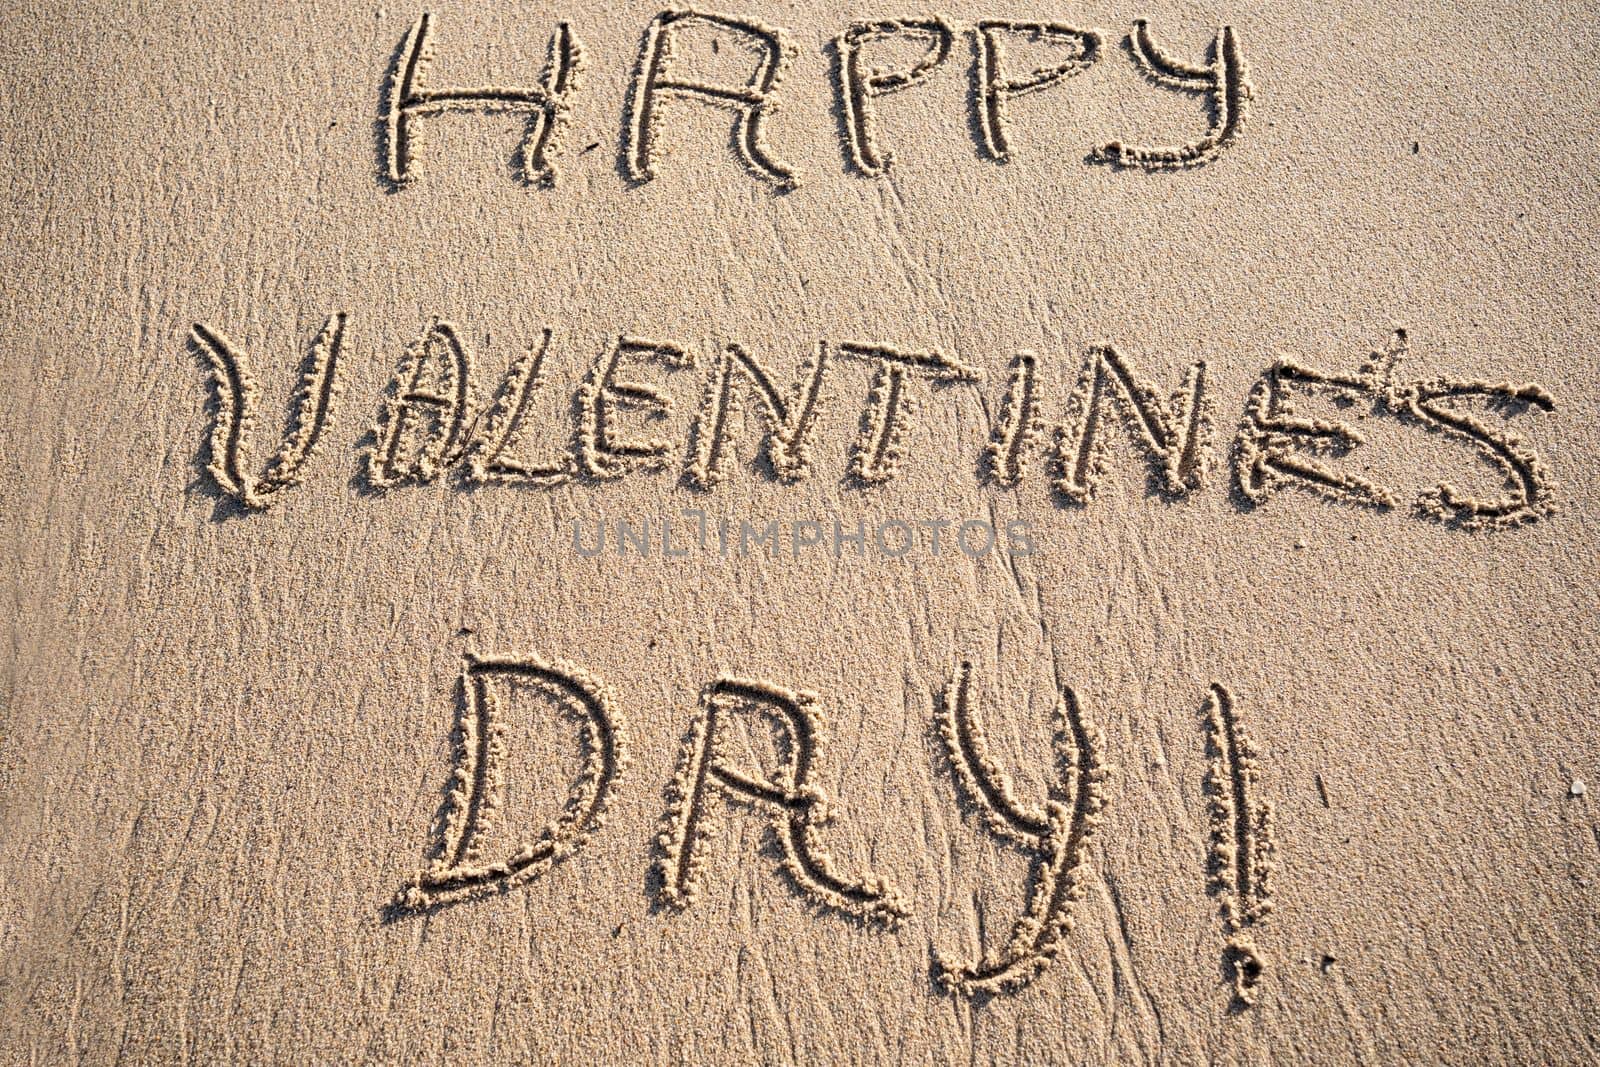 Happy Valentine's Day written on the sand of tropical beach.